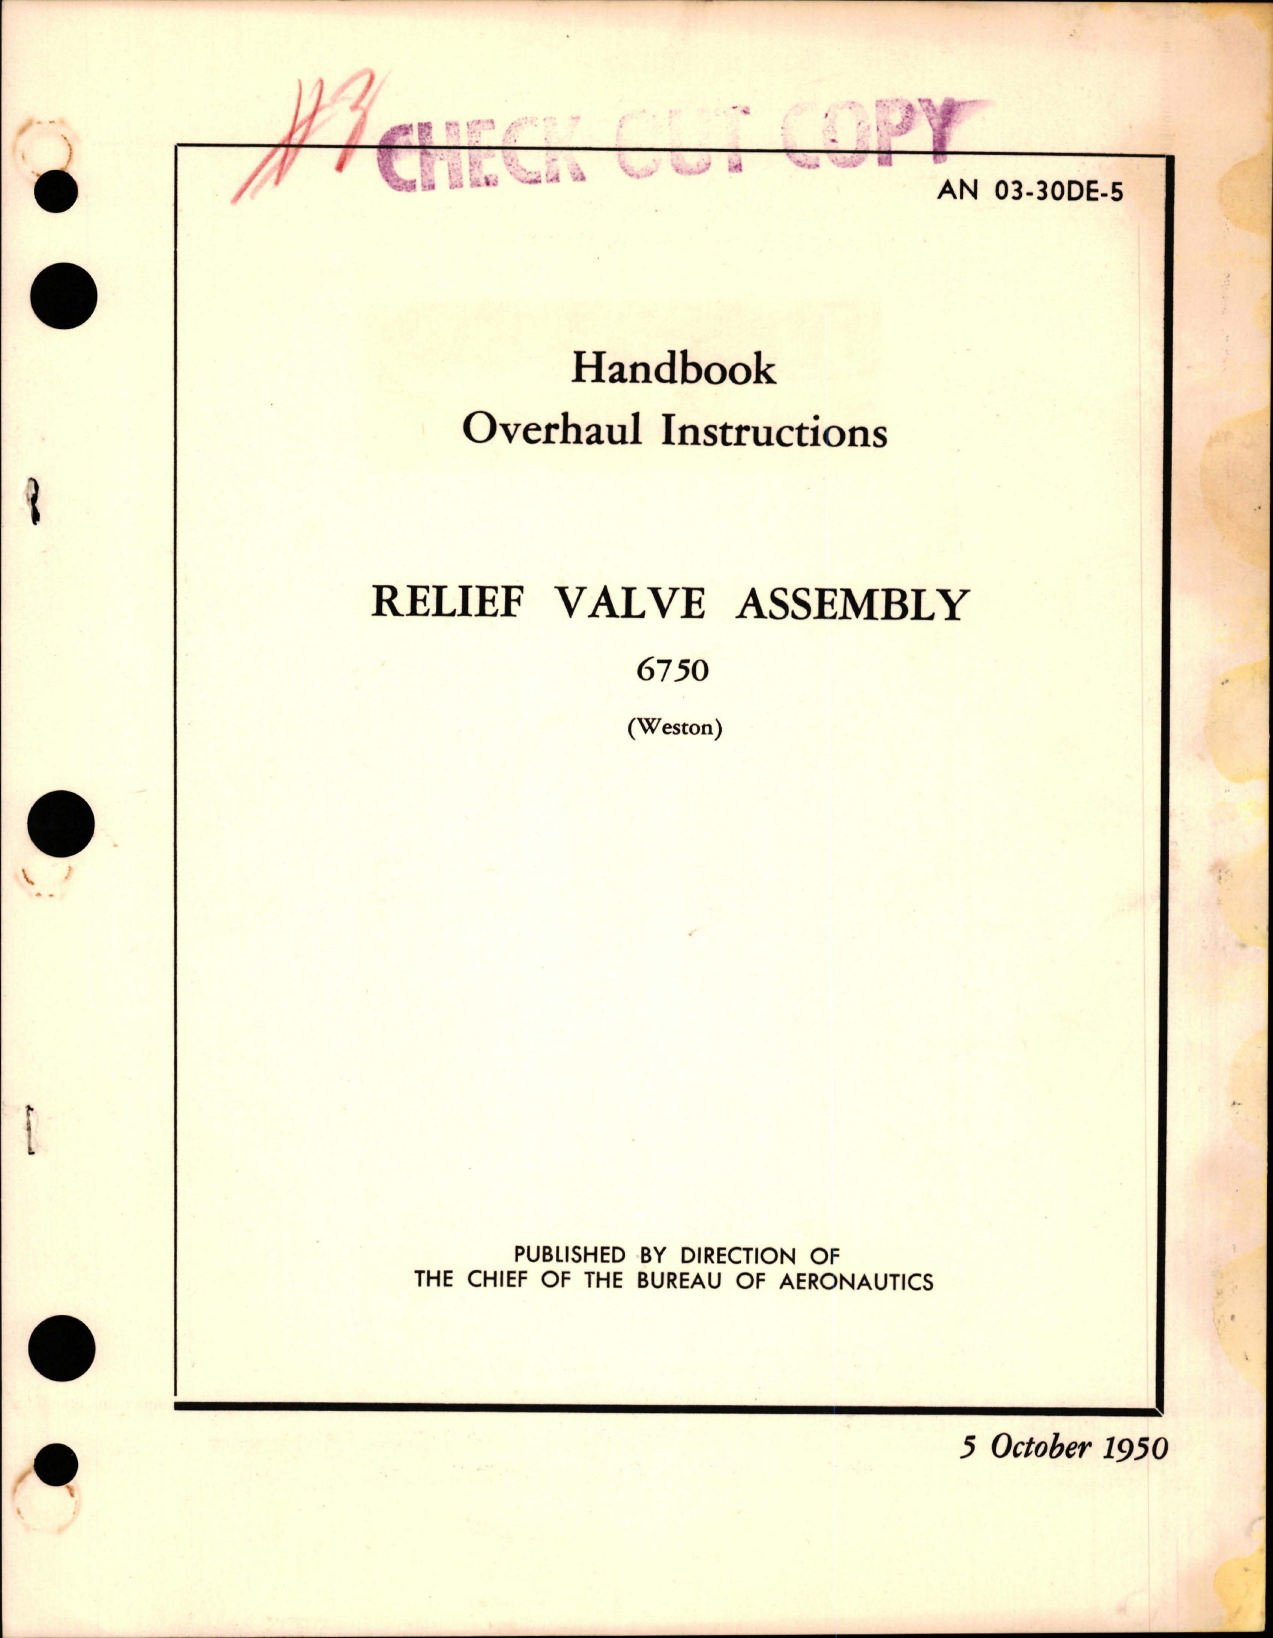 Sample page 1 from AirCorps Library document: Overhaul Instructions for Relief Valve Assembly - 6750